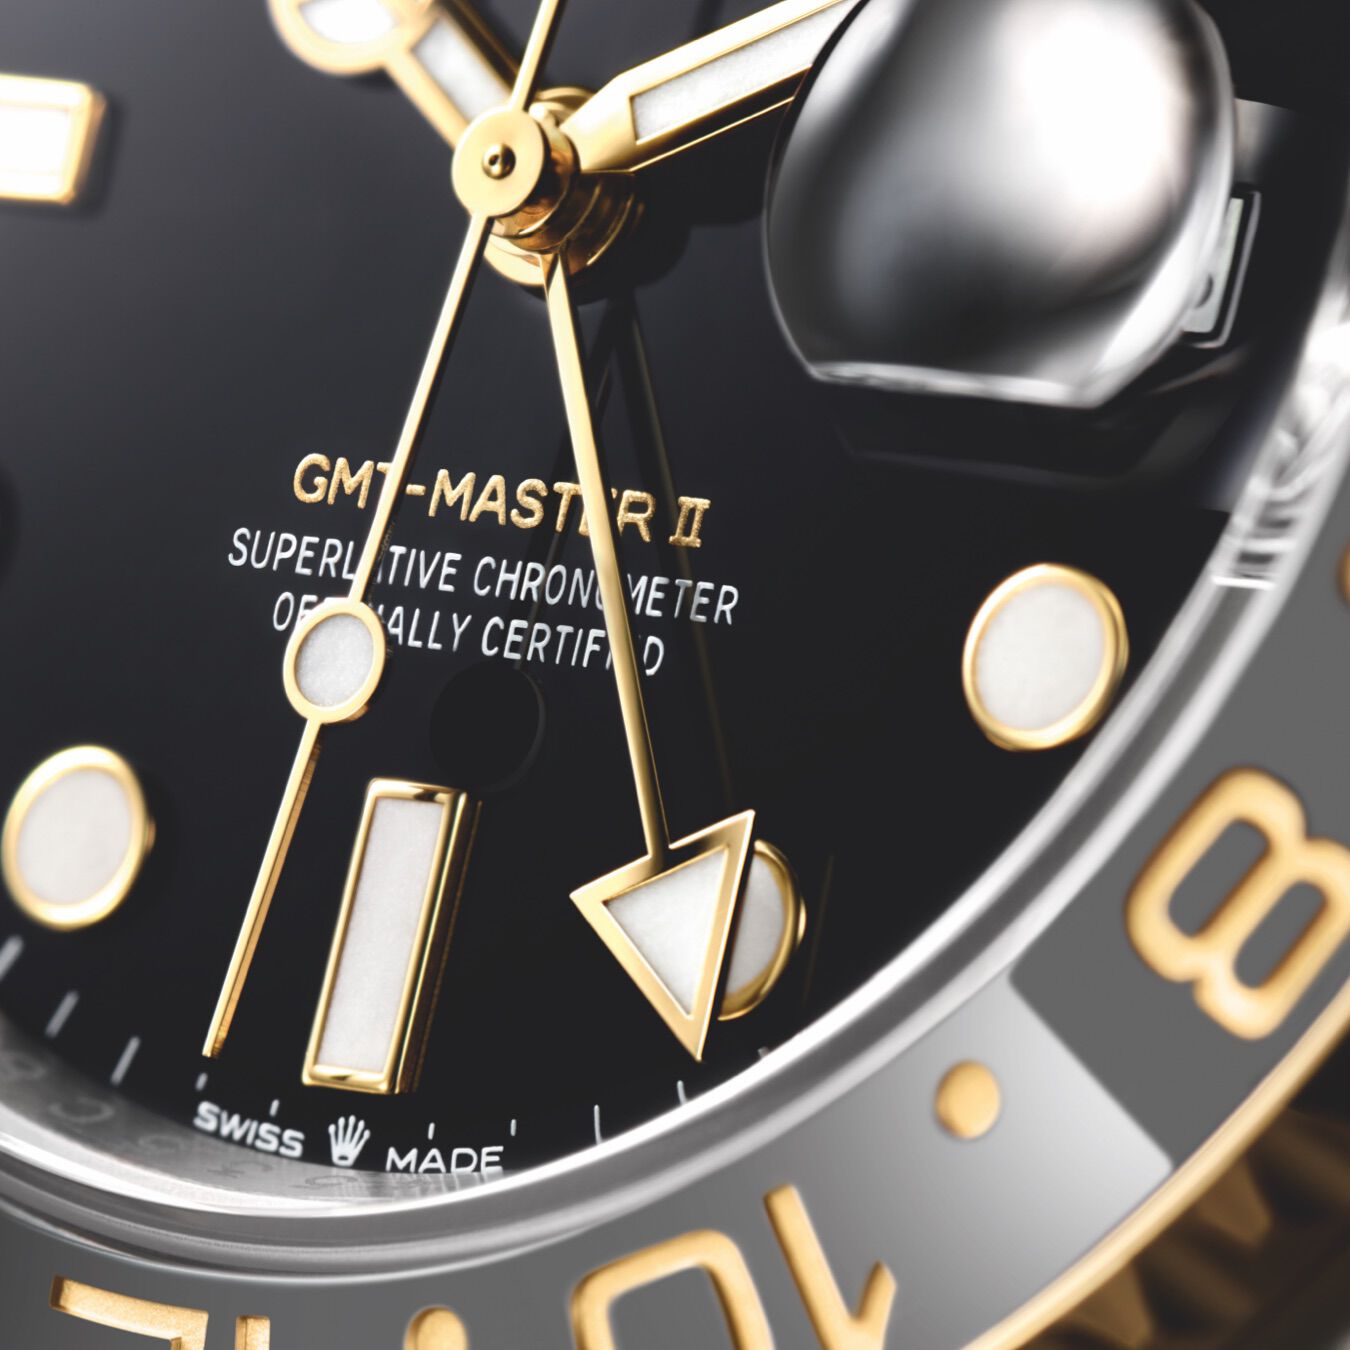 A GMT-Master II black dial with yellow gold hands and luminous indices and cyclops date window. 